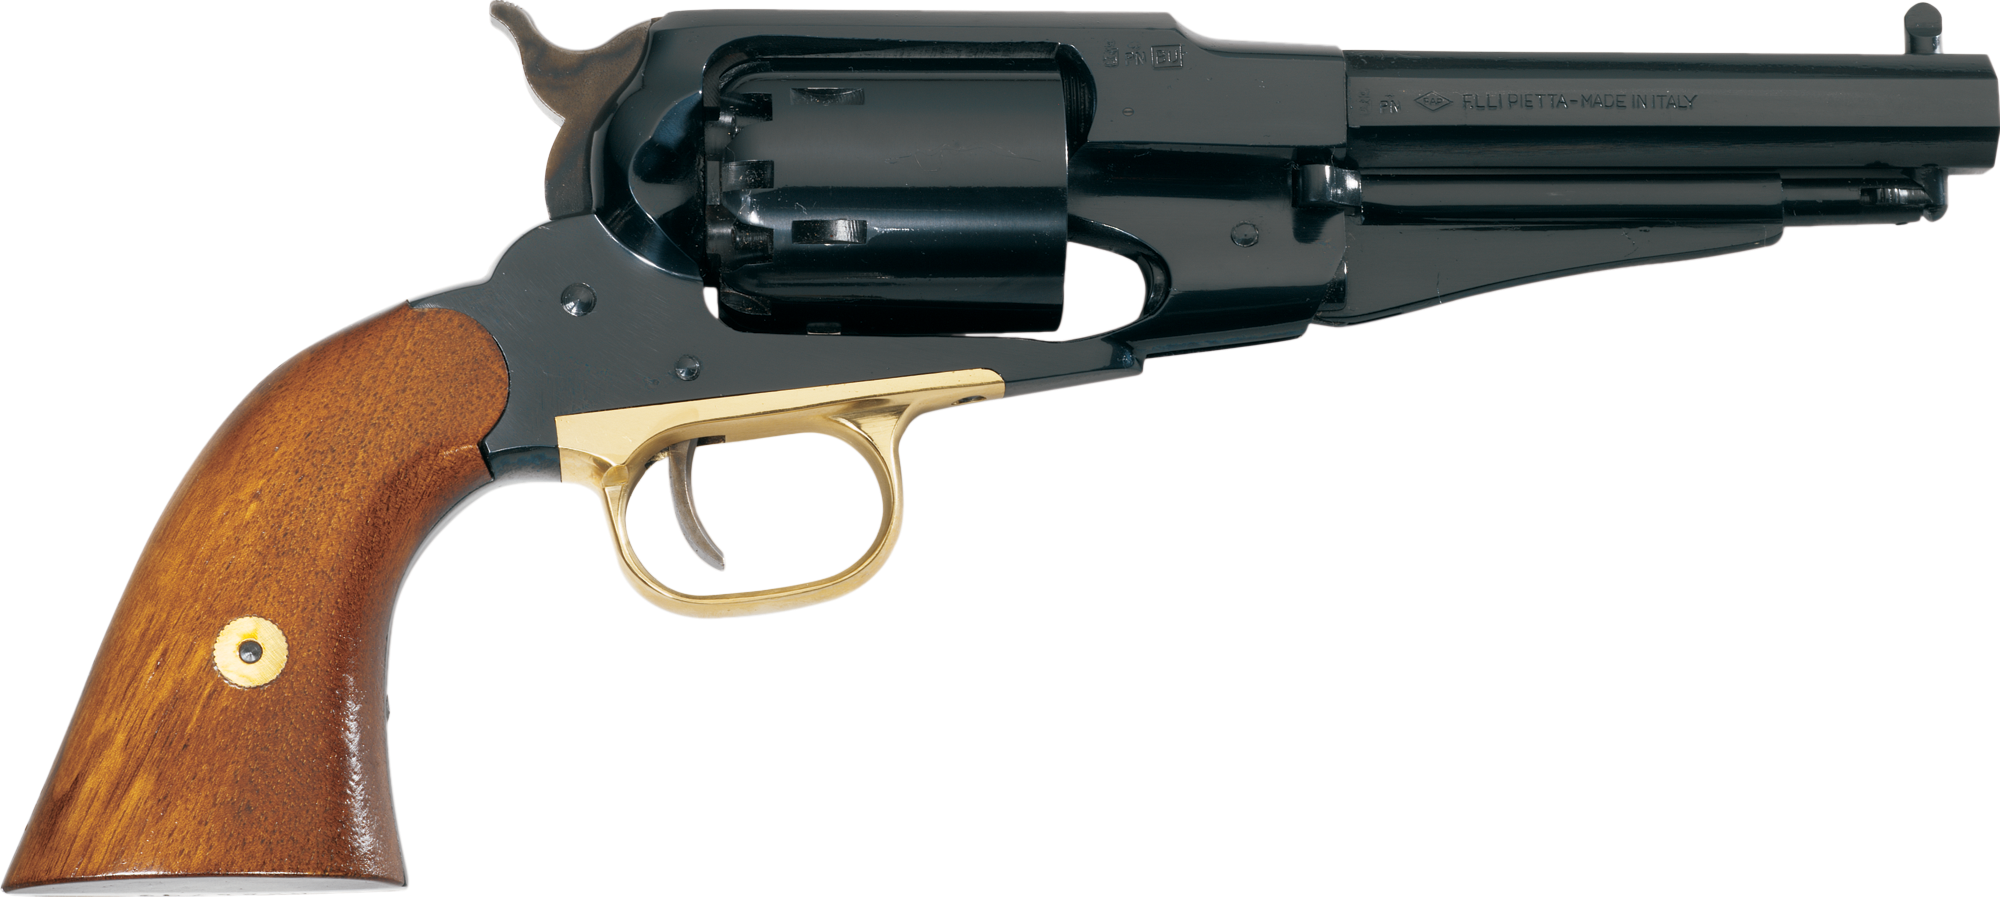 The cheapest cap and ball revolver - Pietta 1851 Navy with brass frame 